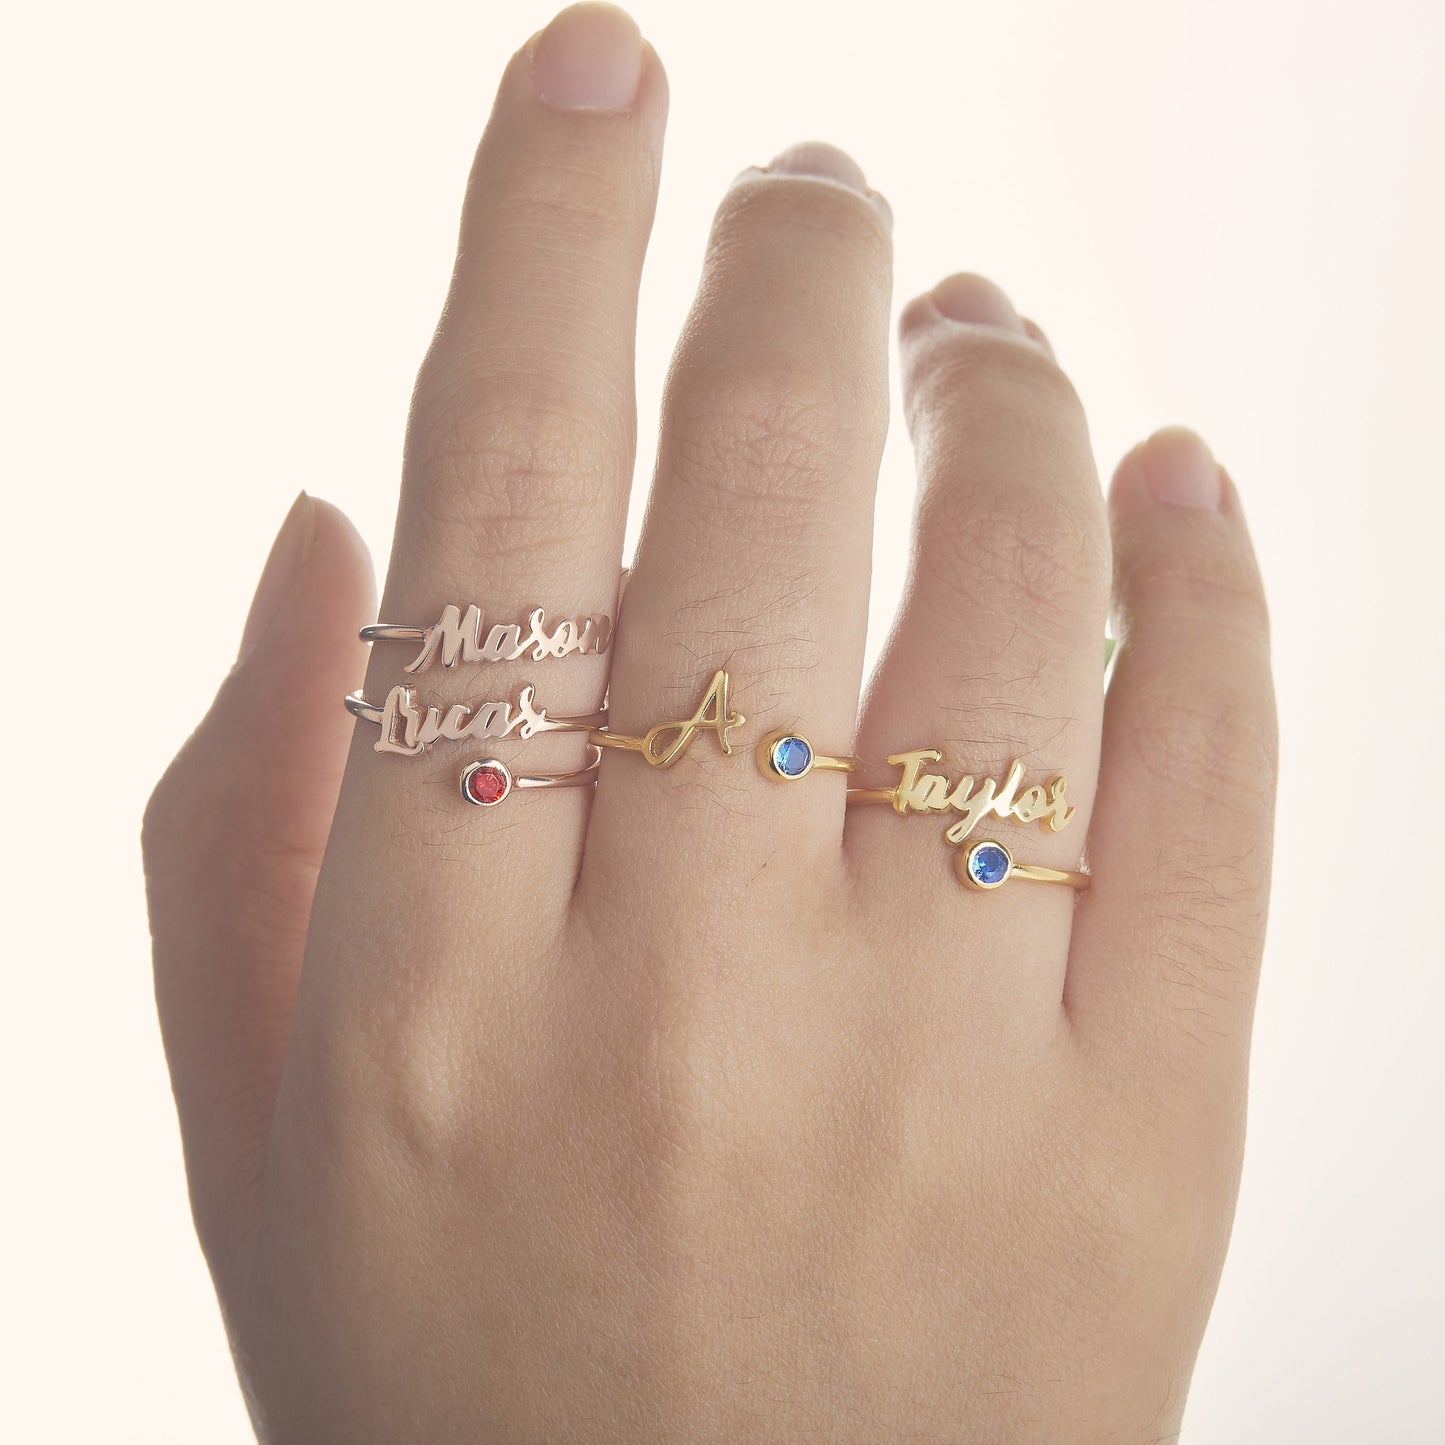 Name Initials Ring | Birthstone Ring | Birthstone Jewelry | Stacking Ring | Personalized  Stackable Ring | Family Ring | Dainty Promise Ring